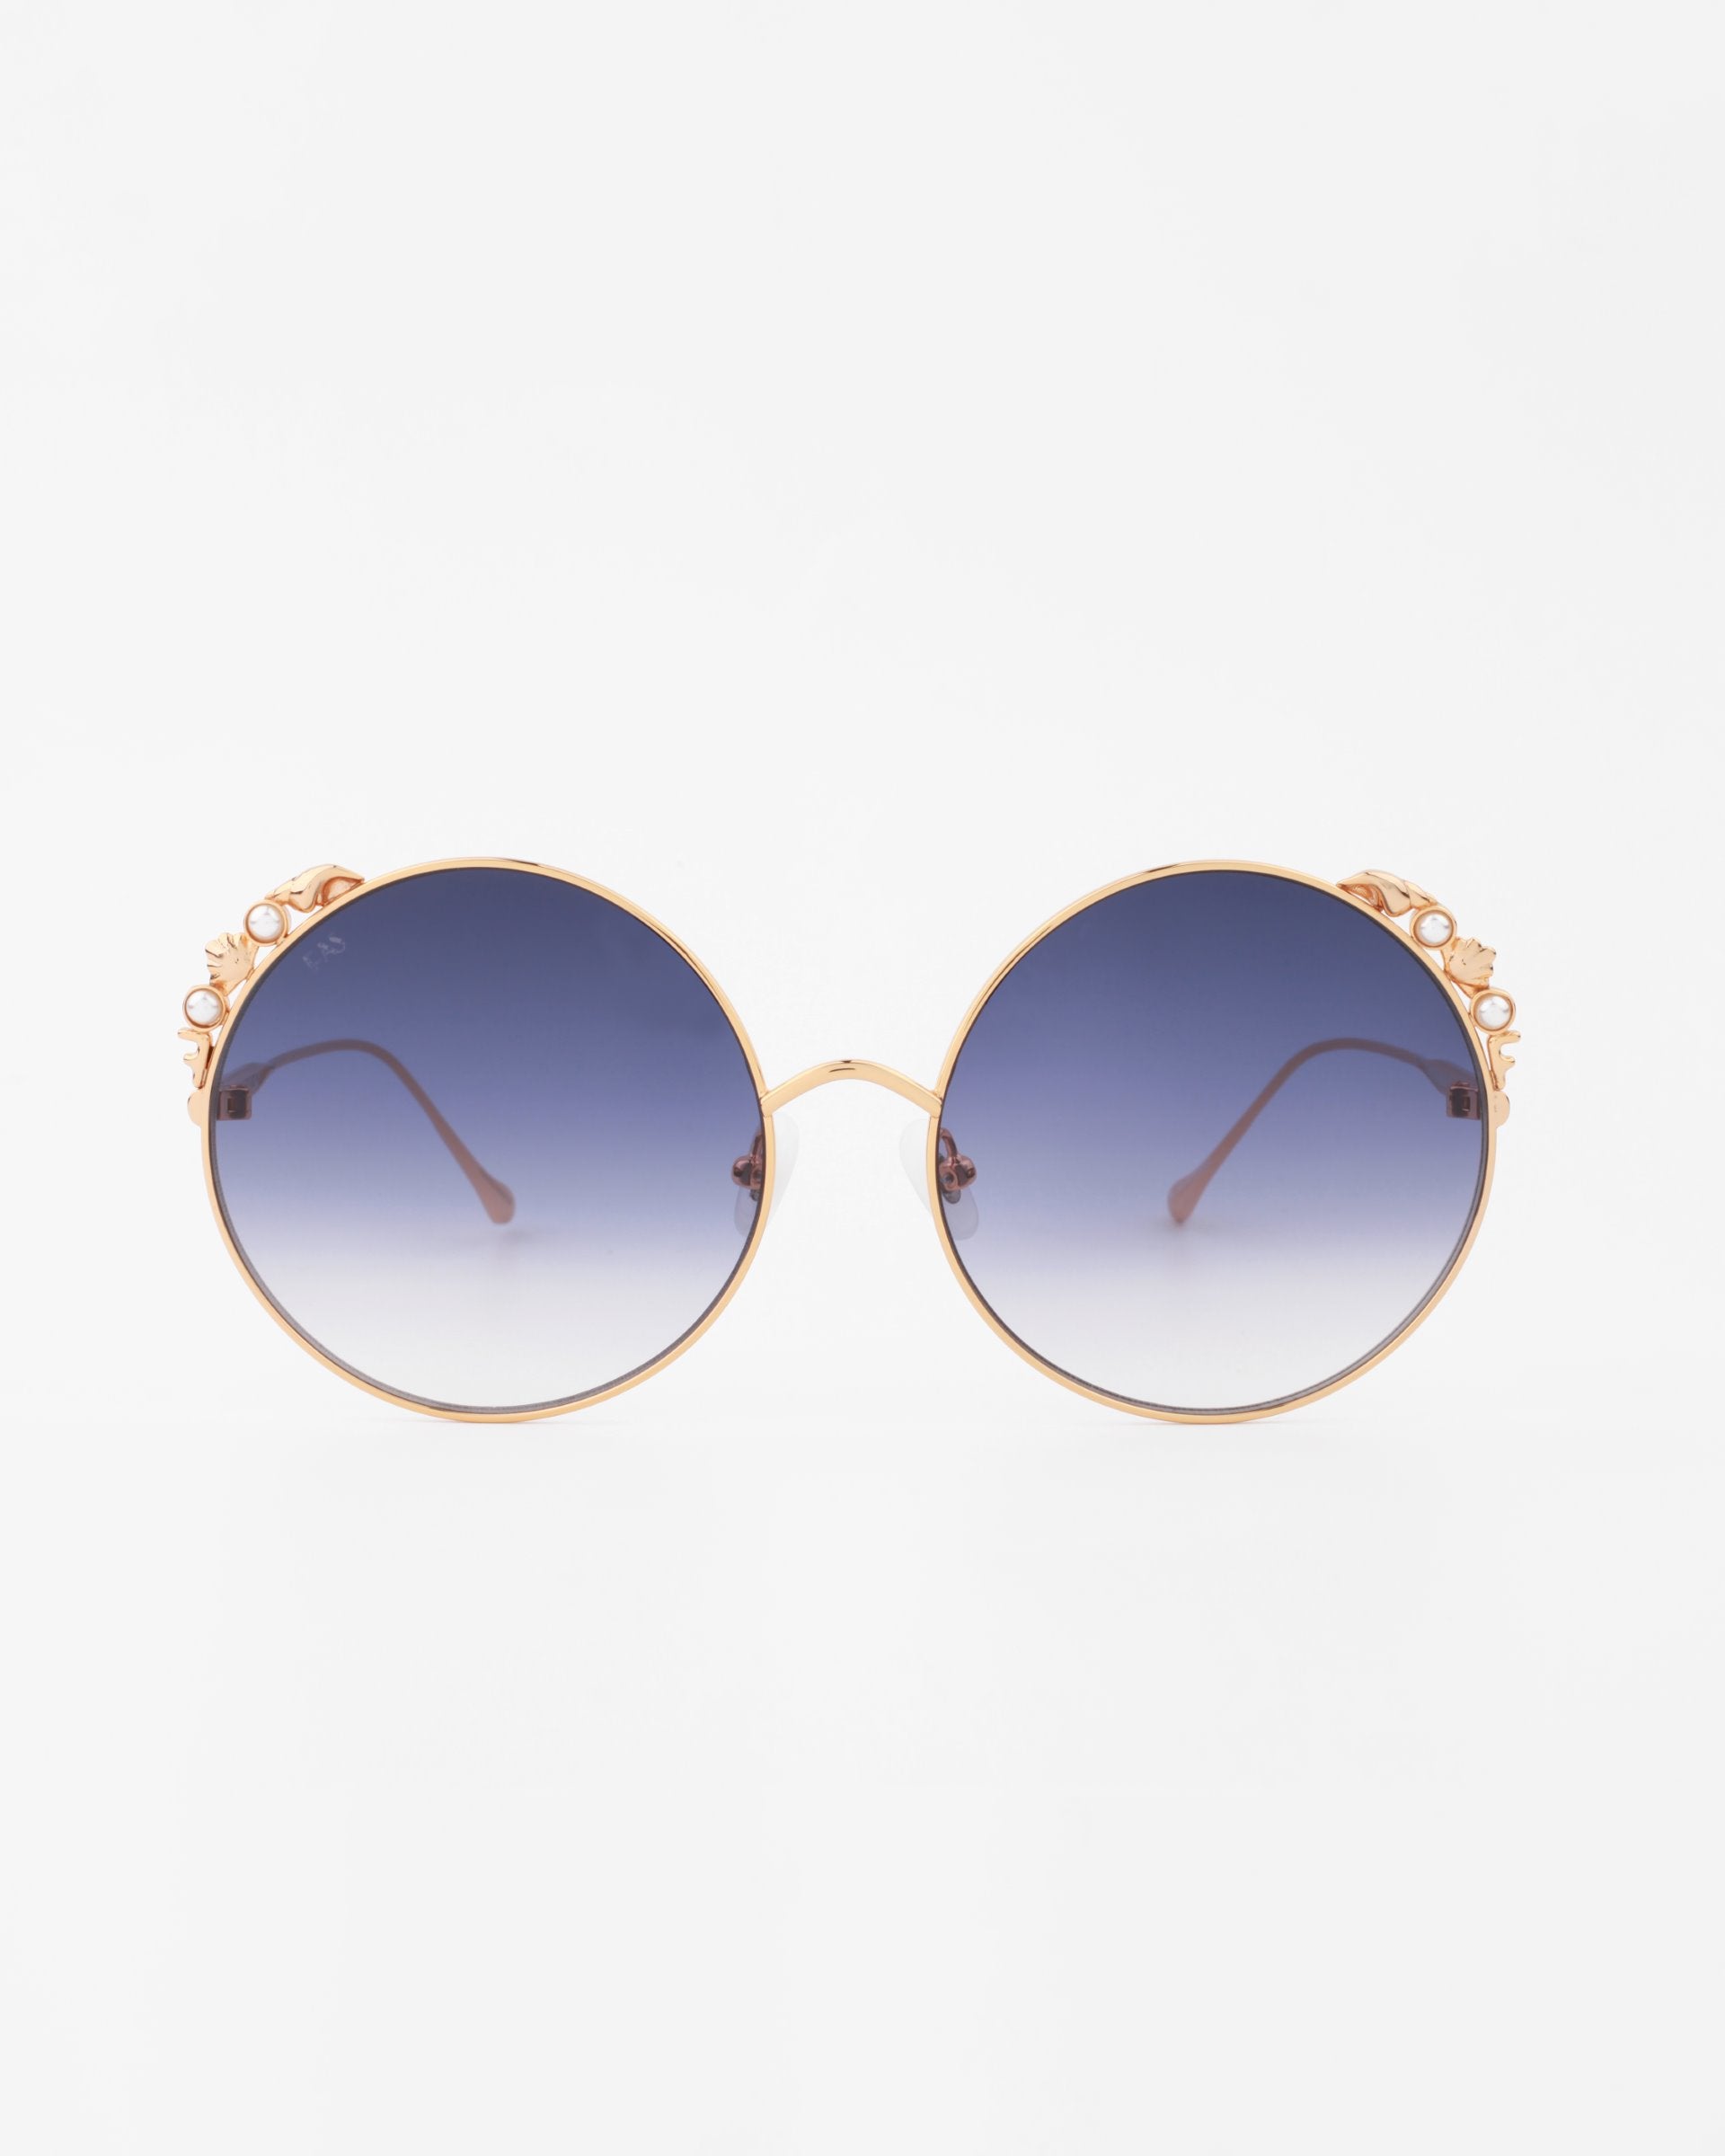 A pair of For Art&#39;s Sake® Lindy handmade gold-plated round sunglasses with ultra-lightweight shatter-resistant dark blue gradient lenses. The bridge and end pieces have a decorative floral embellishment, offering 100% UVA &amp; UVB protection. The For Art&#39;s Sake® Lindy sunglasses are set against a plain white background.